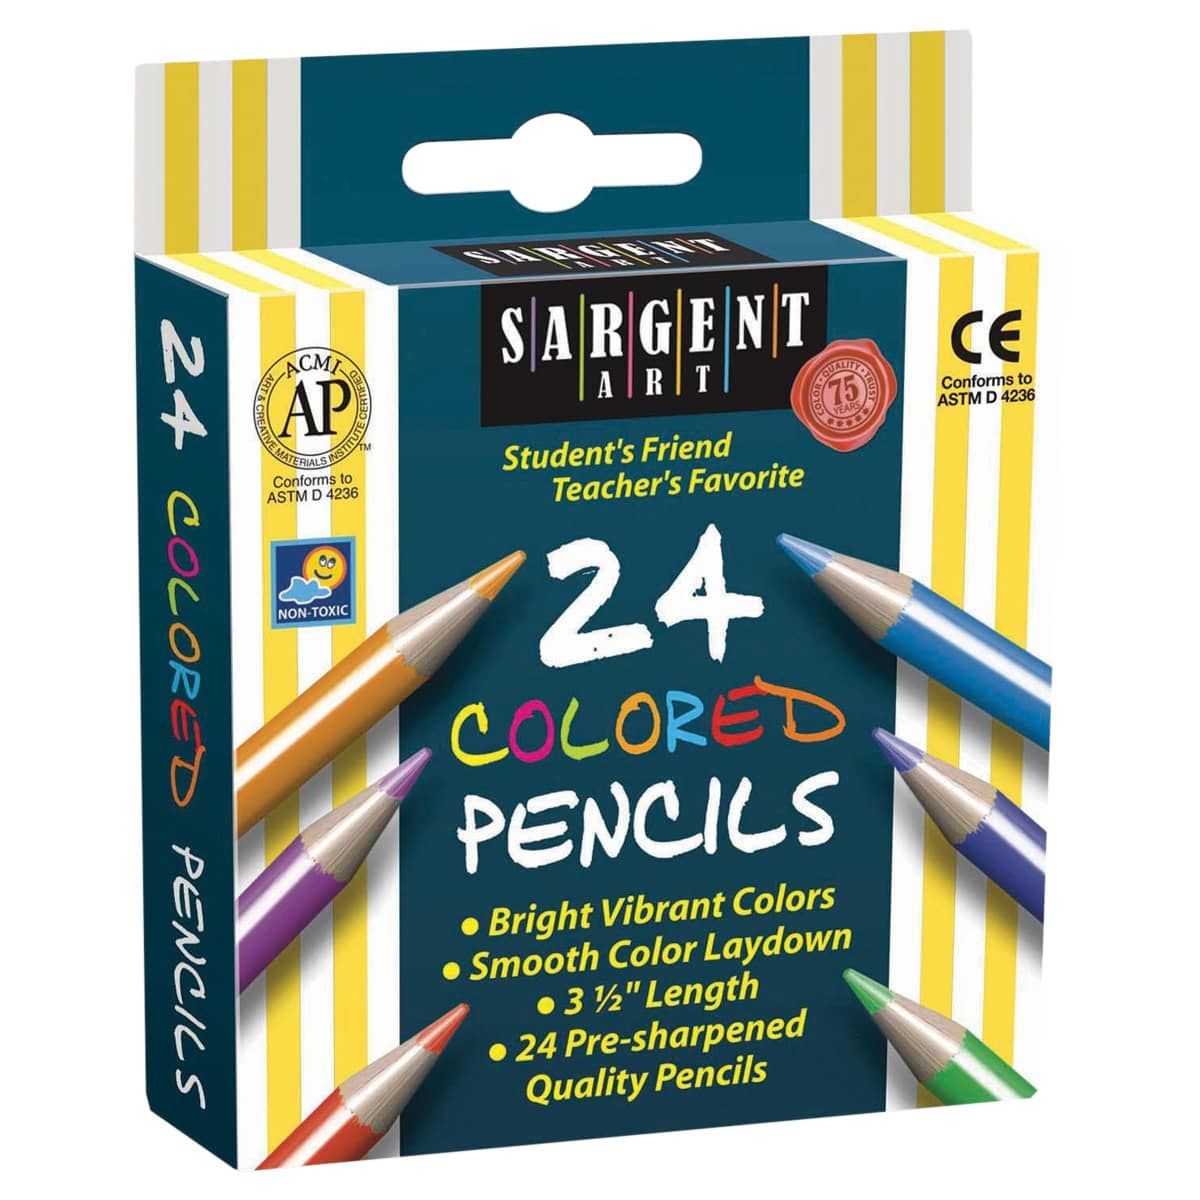 24 Premium Colored Pencils for Adult Coloring,Artist Soft Series Lead Cores with Vibrant Colors,Professional Oil Based Colored Pencils,Coloring Pencils for Adults and Kids,Drawing Pencils,Art Pencils 